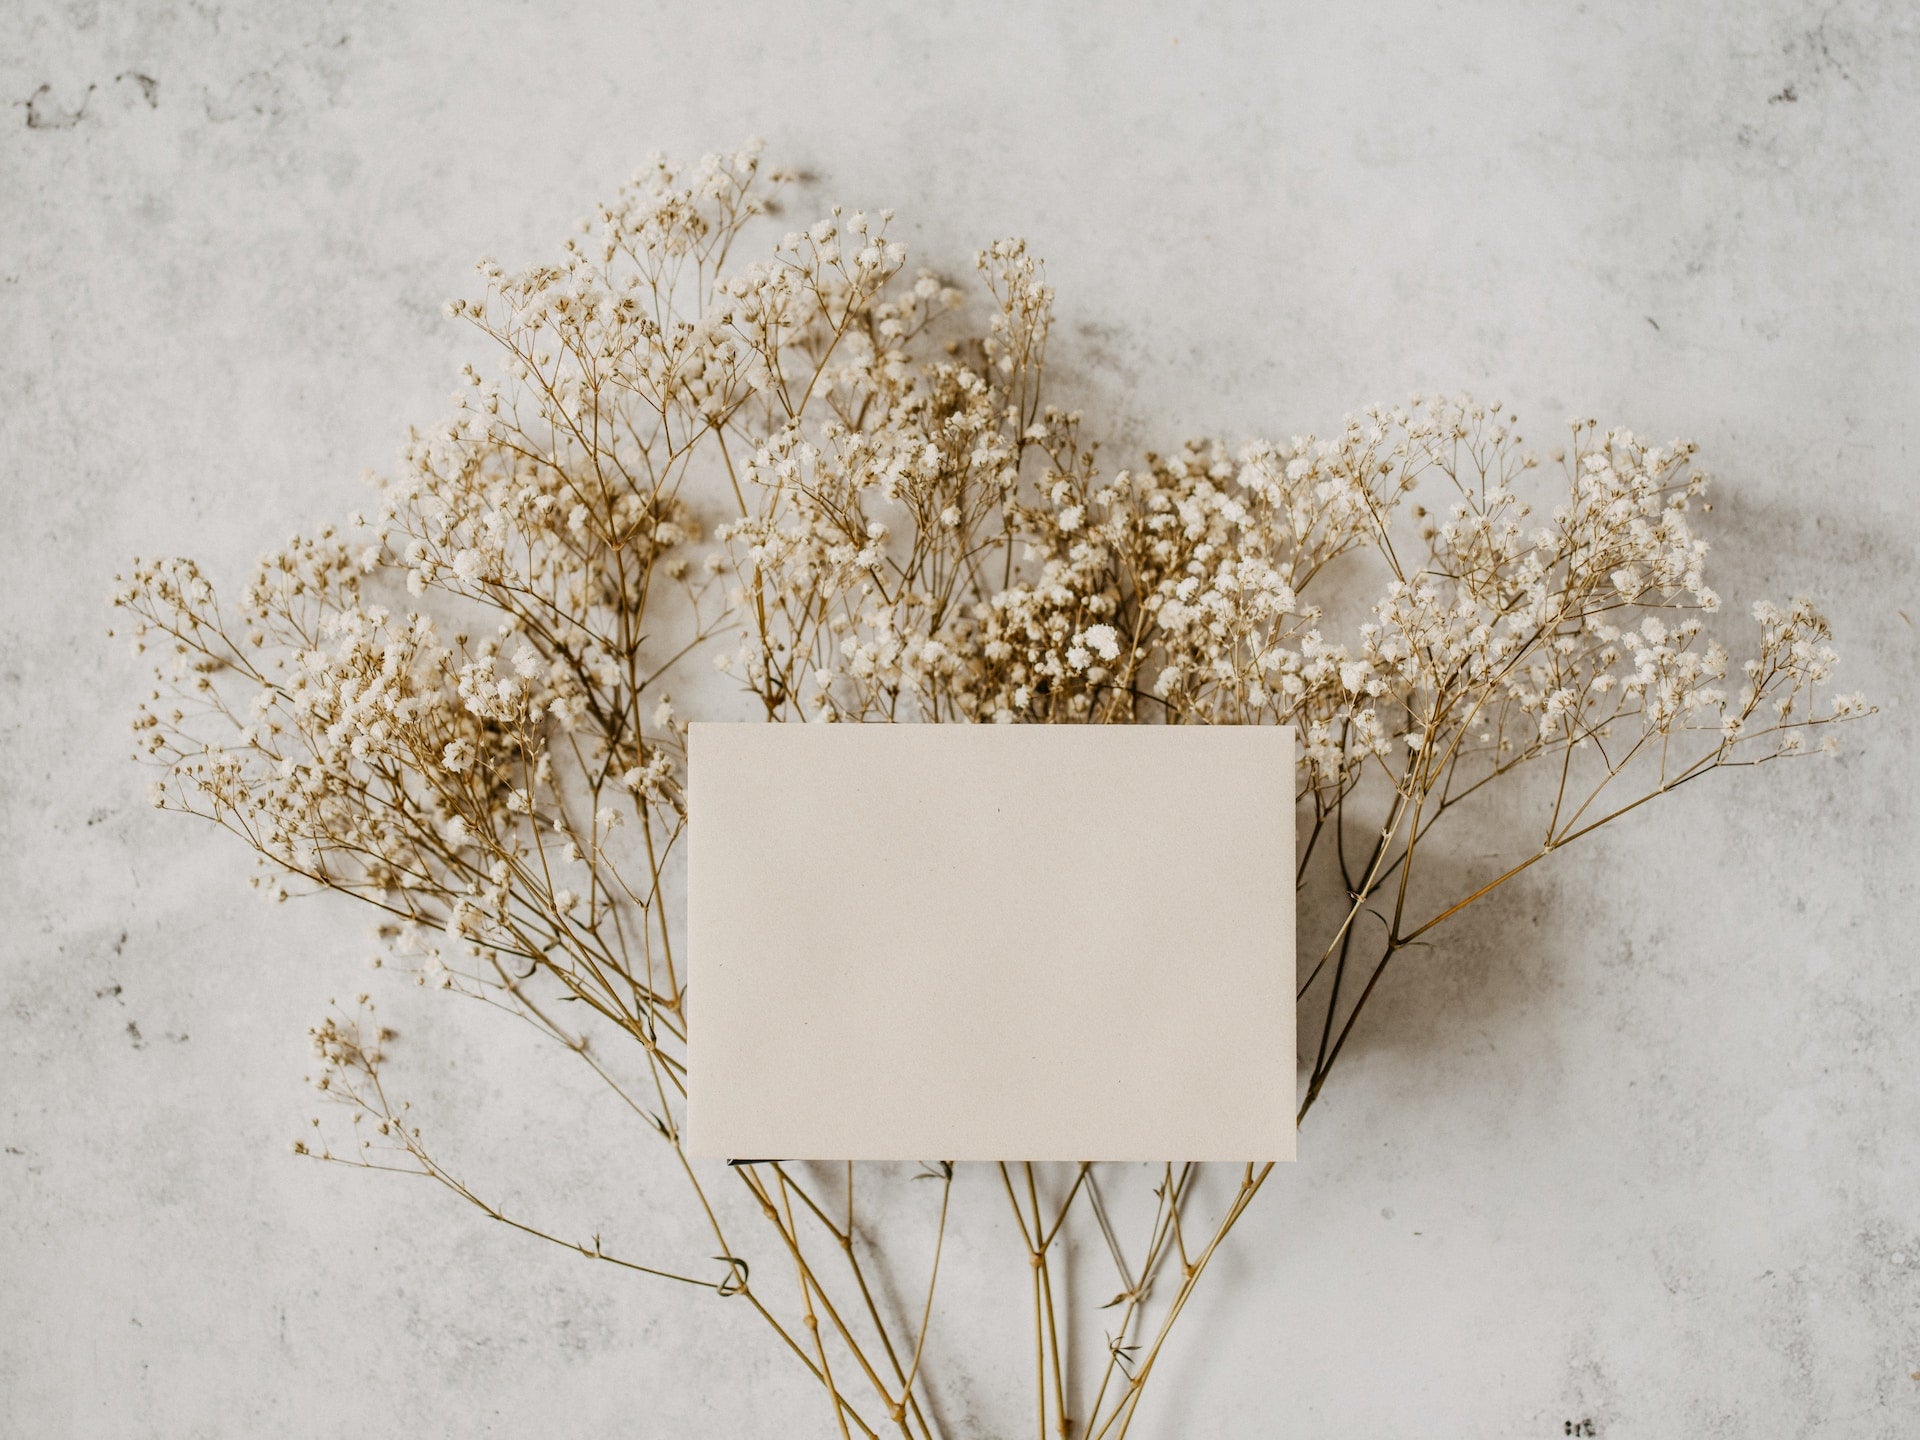 Card on top of baby's breath flowers